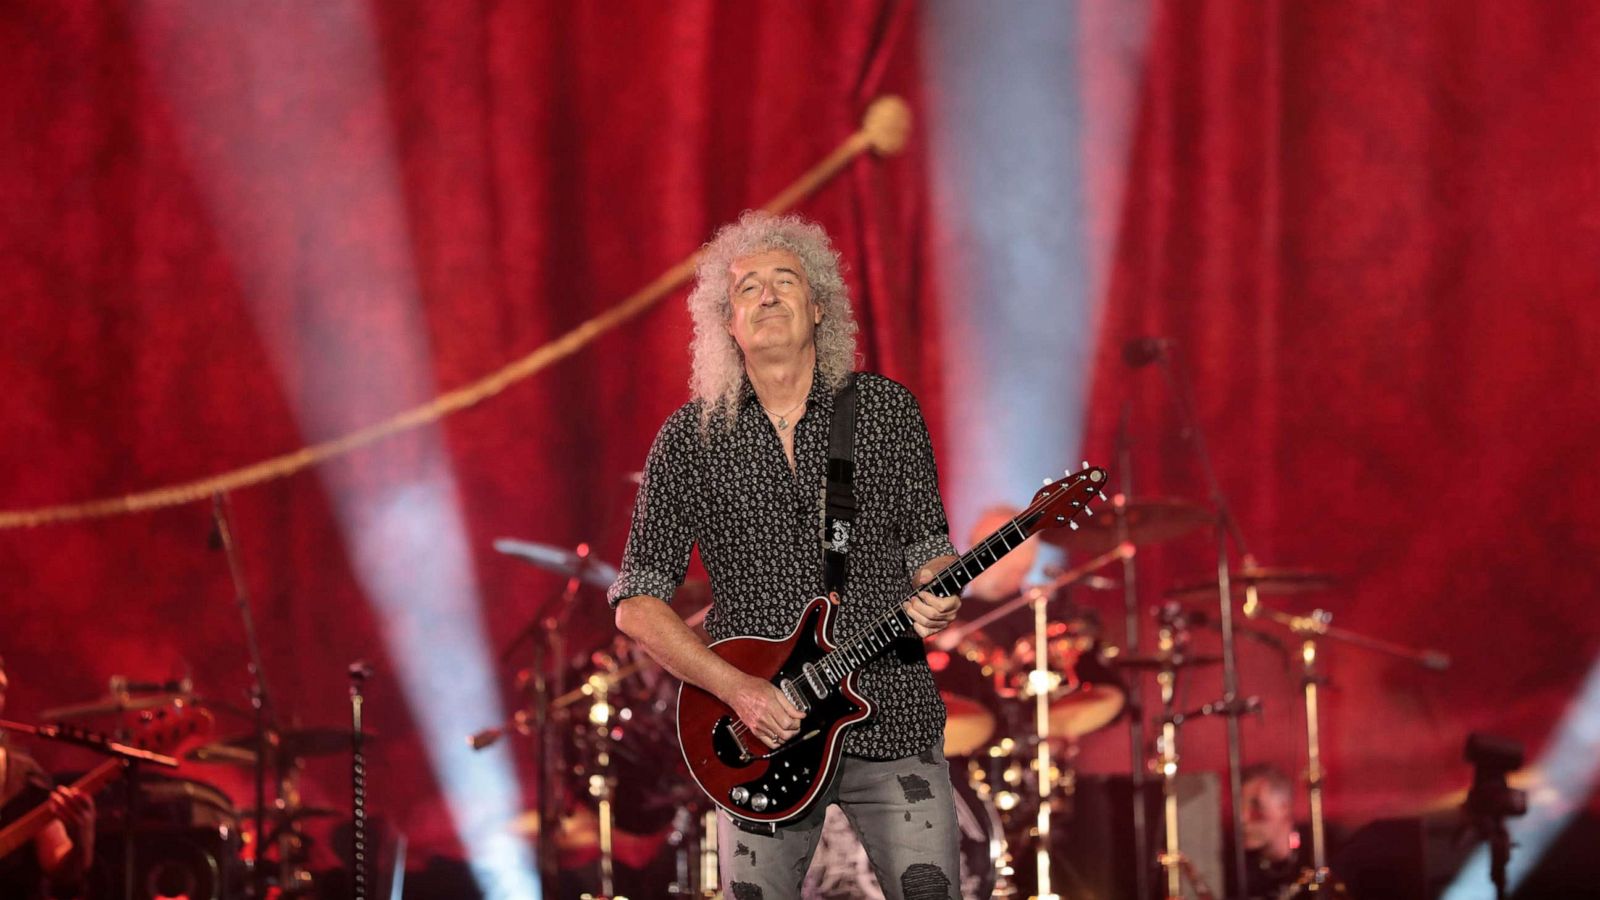 PHOTO: In this Feb. 16, 2020, file photo, Brian May of Queen performs during Fire Fight Australia at ANZ Stadium in Sydney.